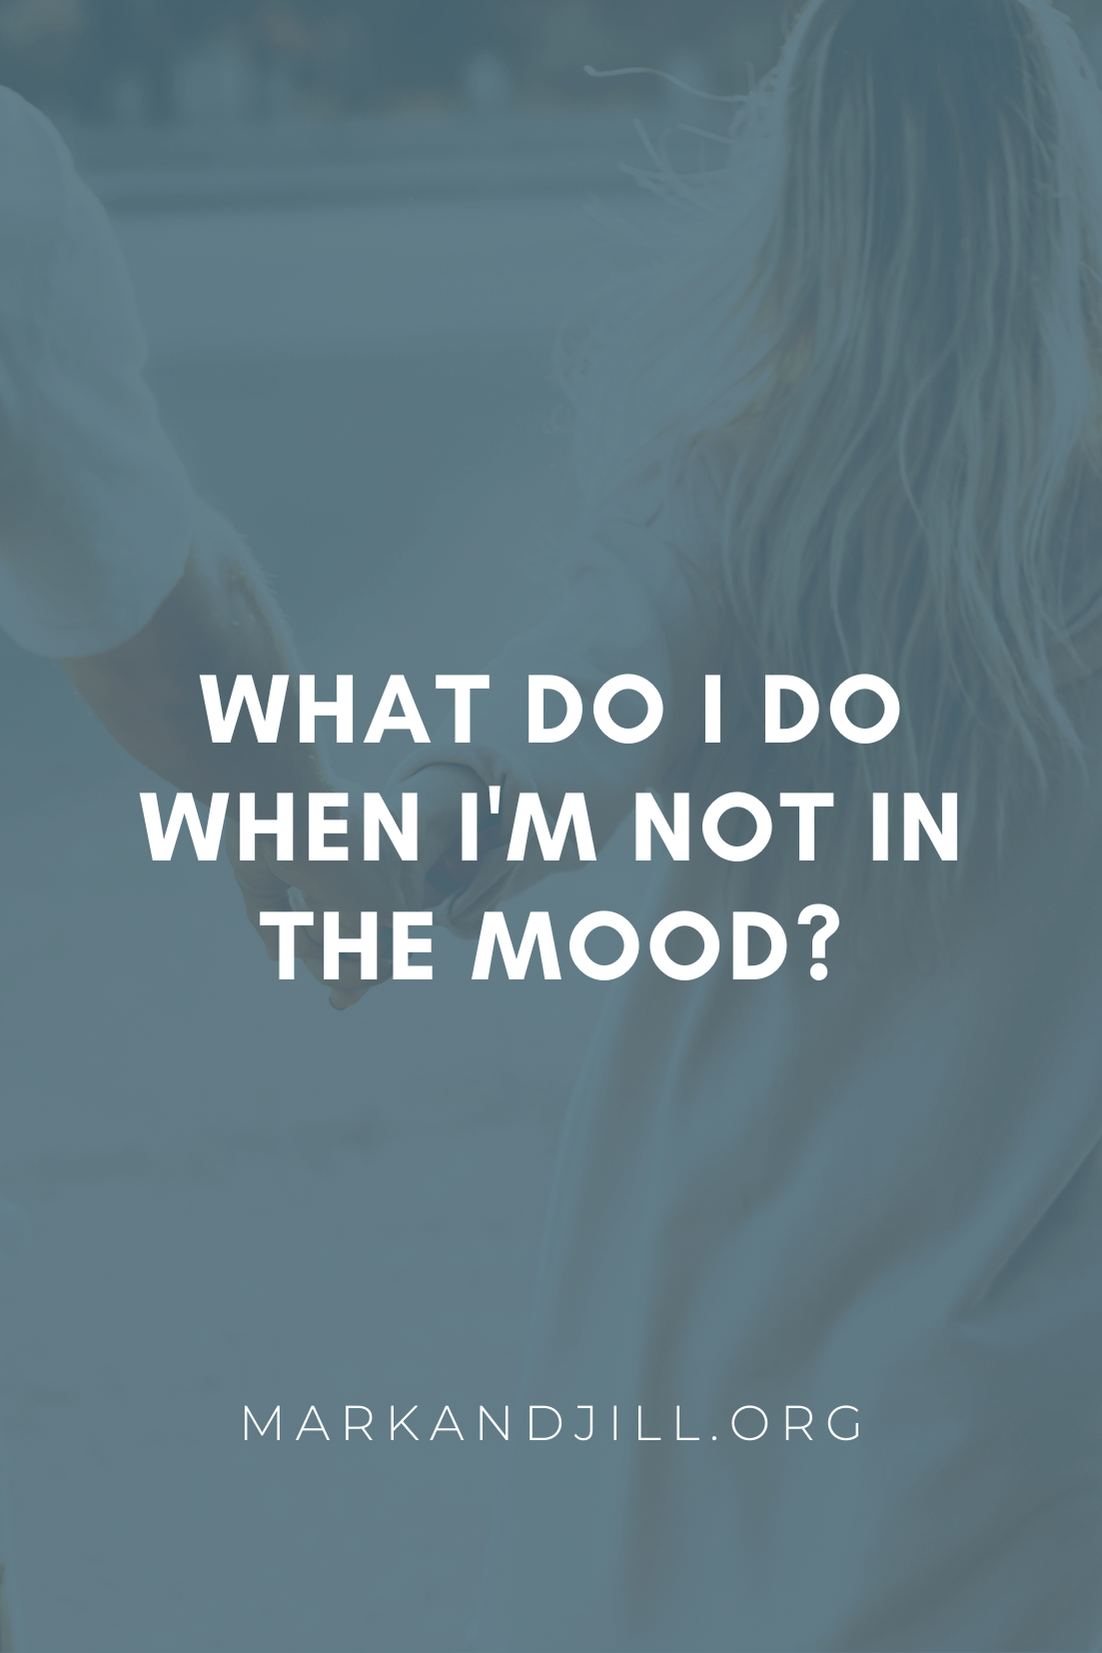 What Do I Do When I’m Not in the Mood?